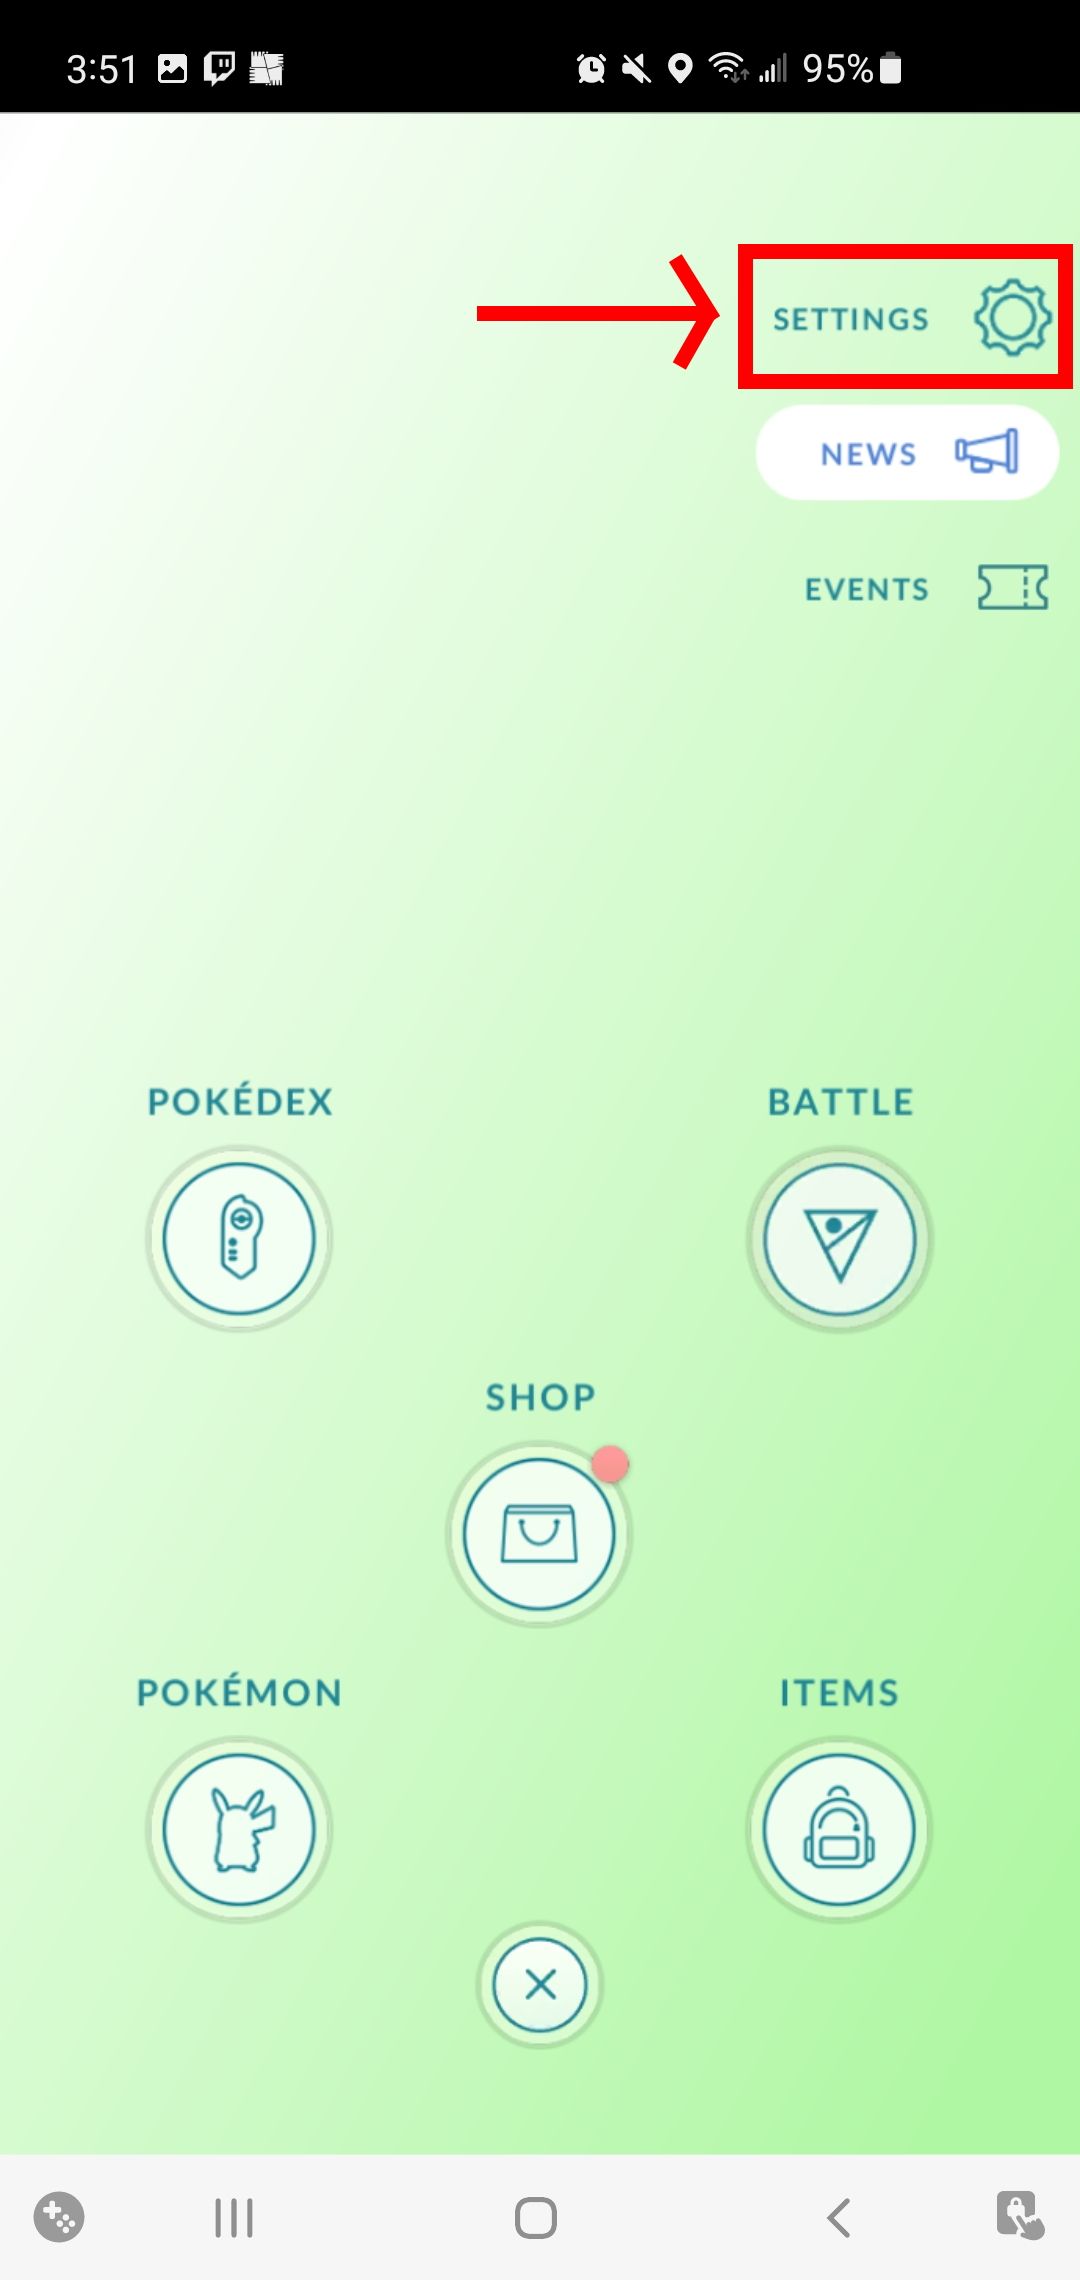 Screenshot of showing the settings in Pokemon Go